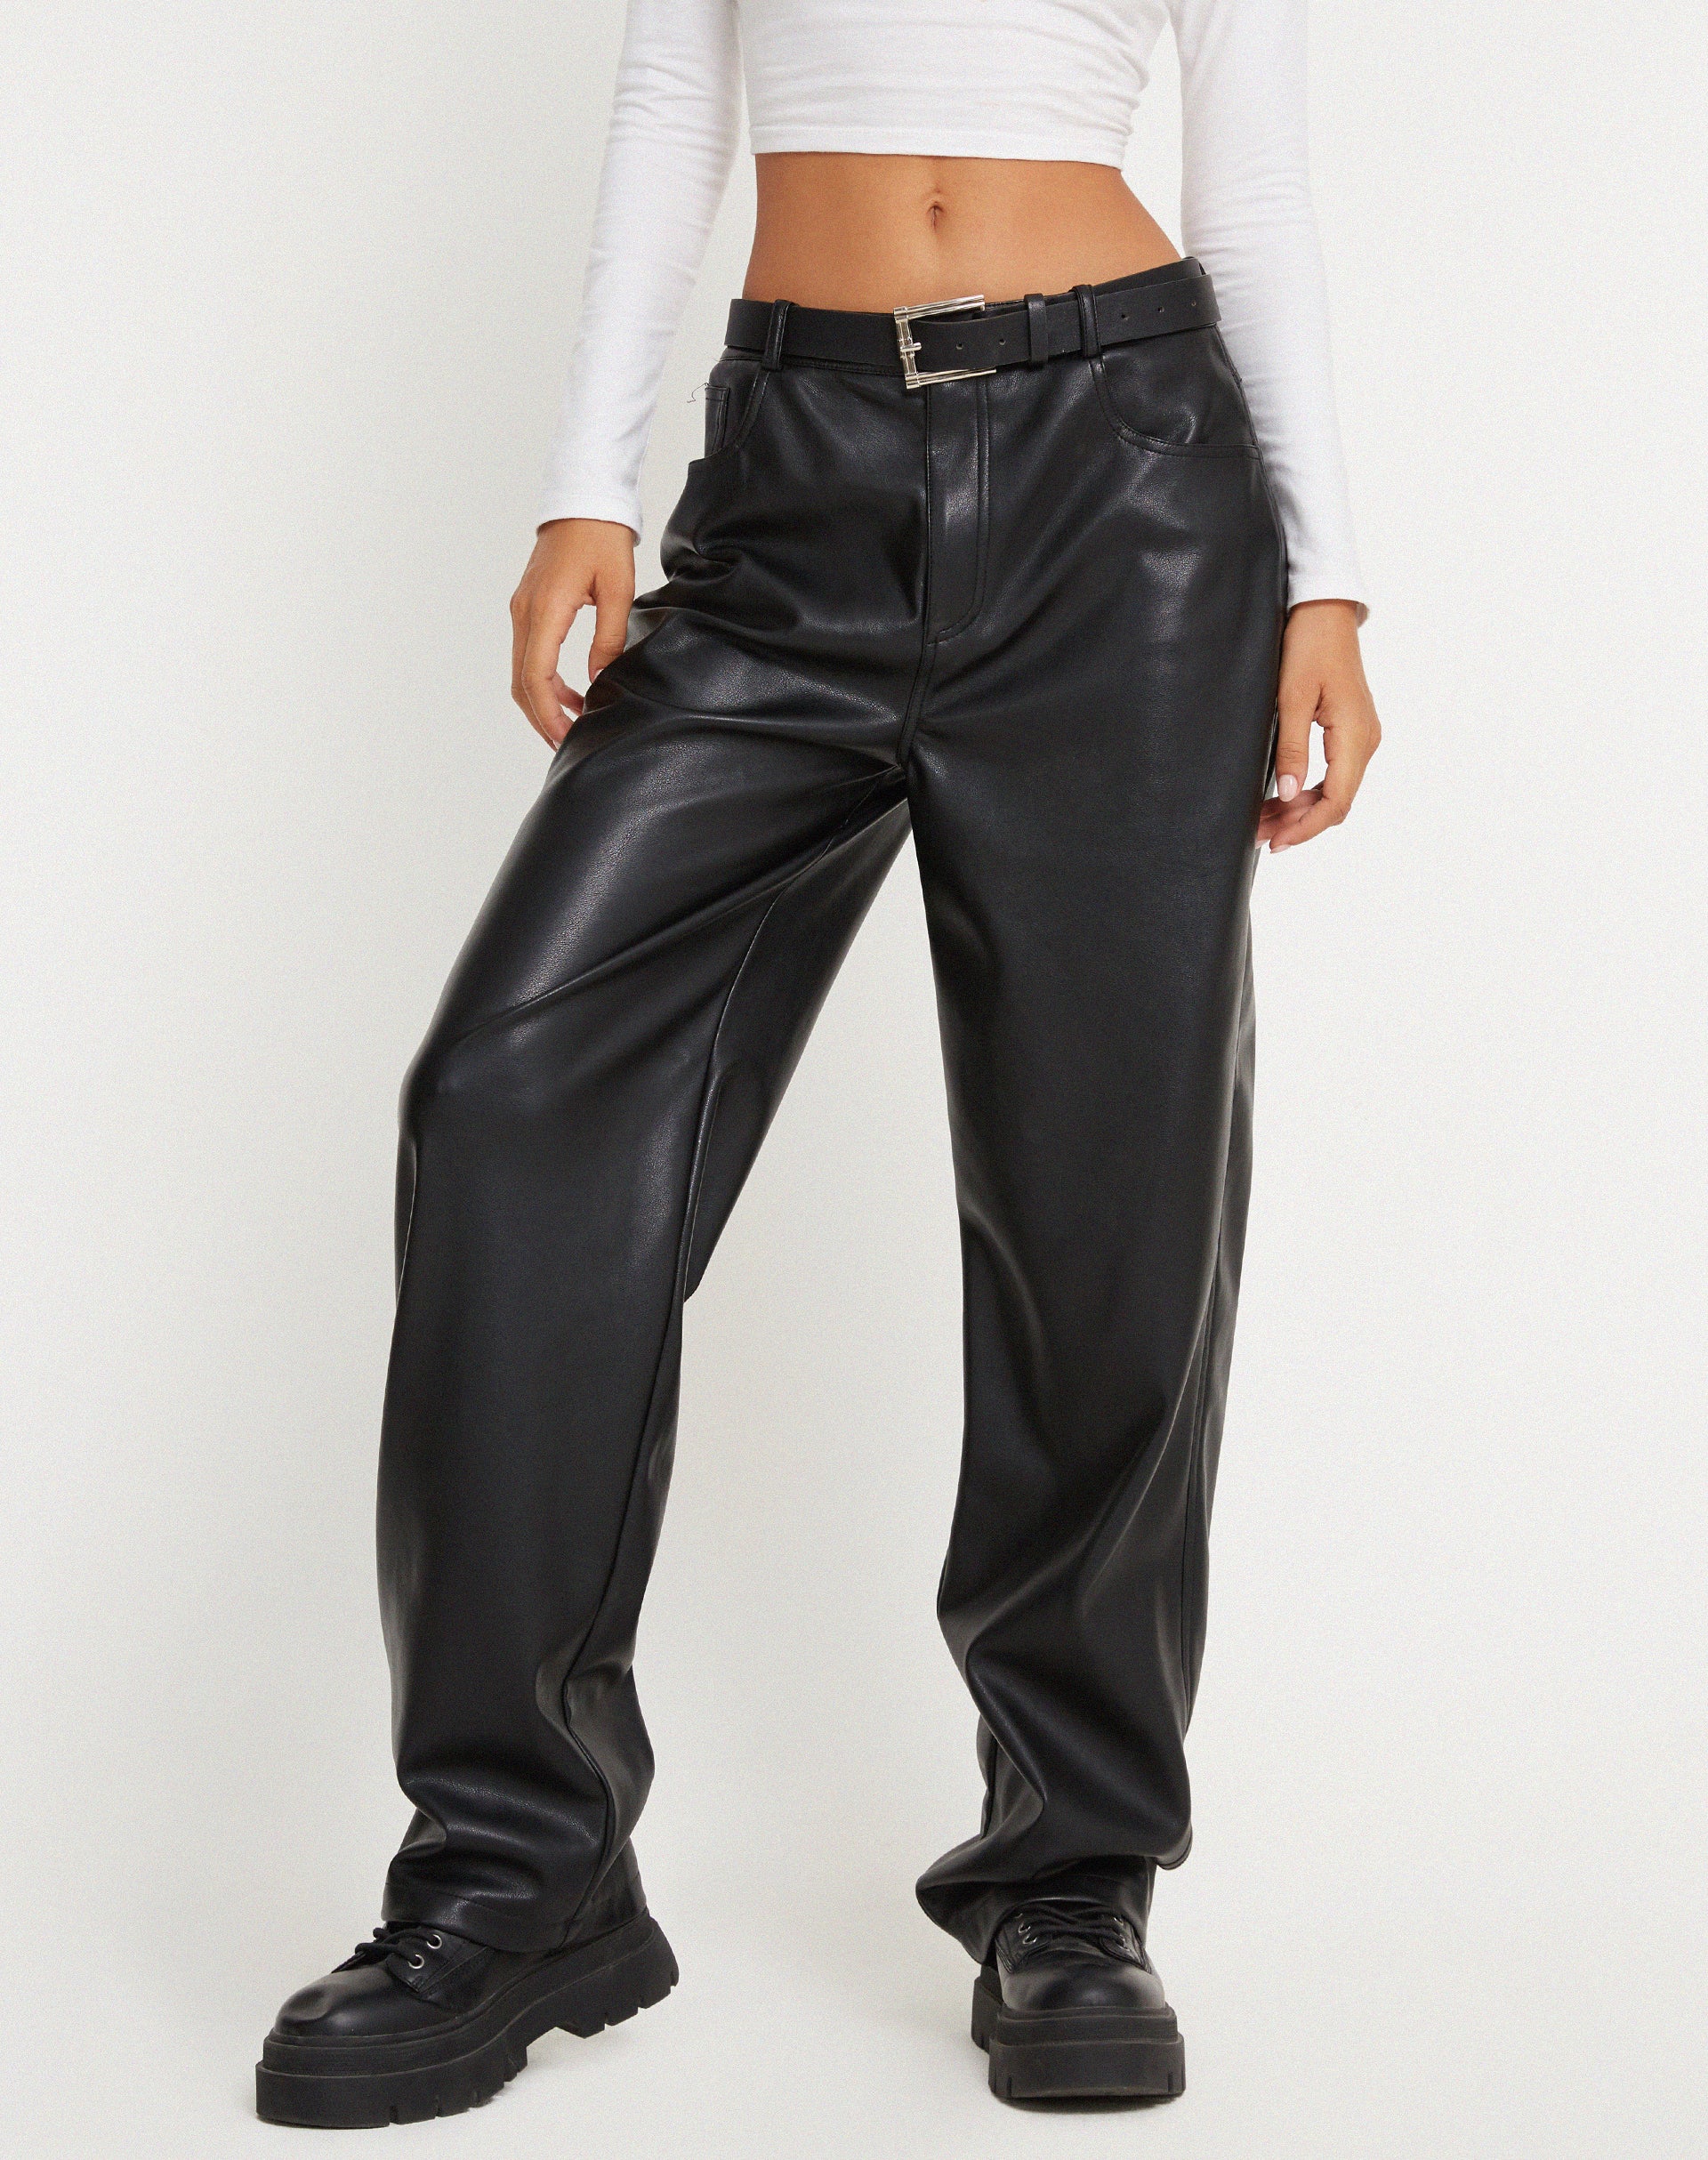 Faux Leather Pants With Contrast Binding  Red leather pants, Leather pants  women, Black leather pants